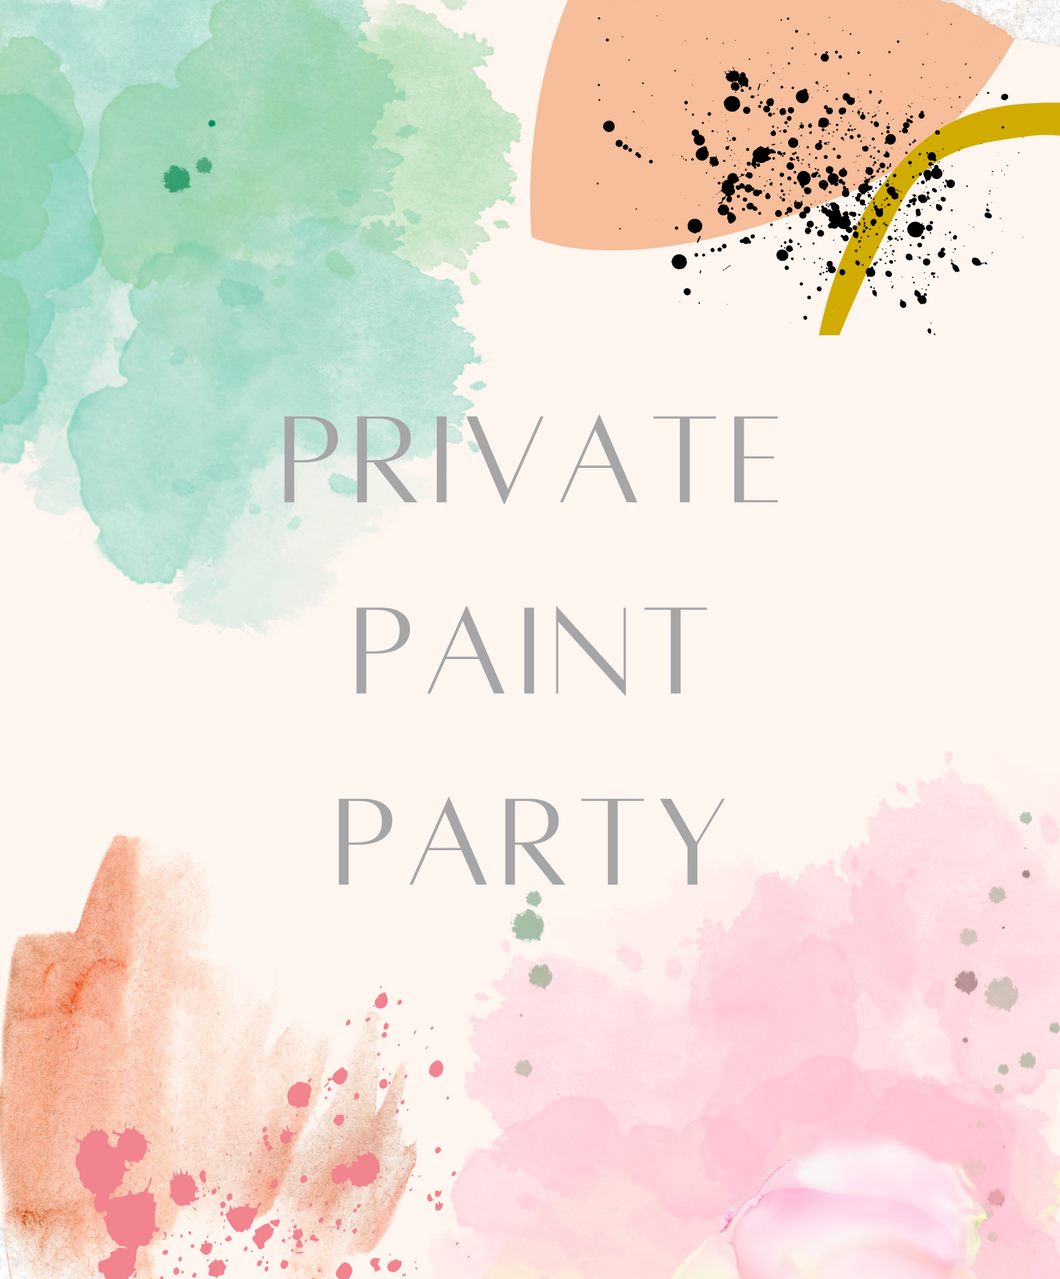 Private Event - Bek's Hens Party - SATURDAY 31st August - 2pm